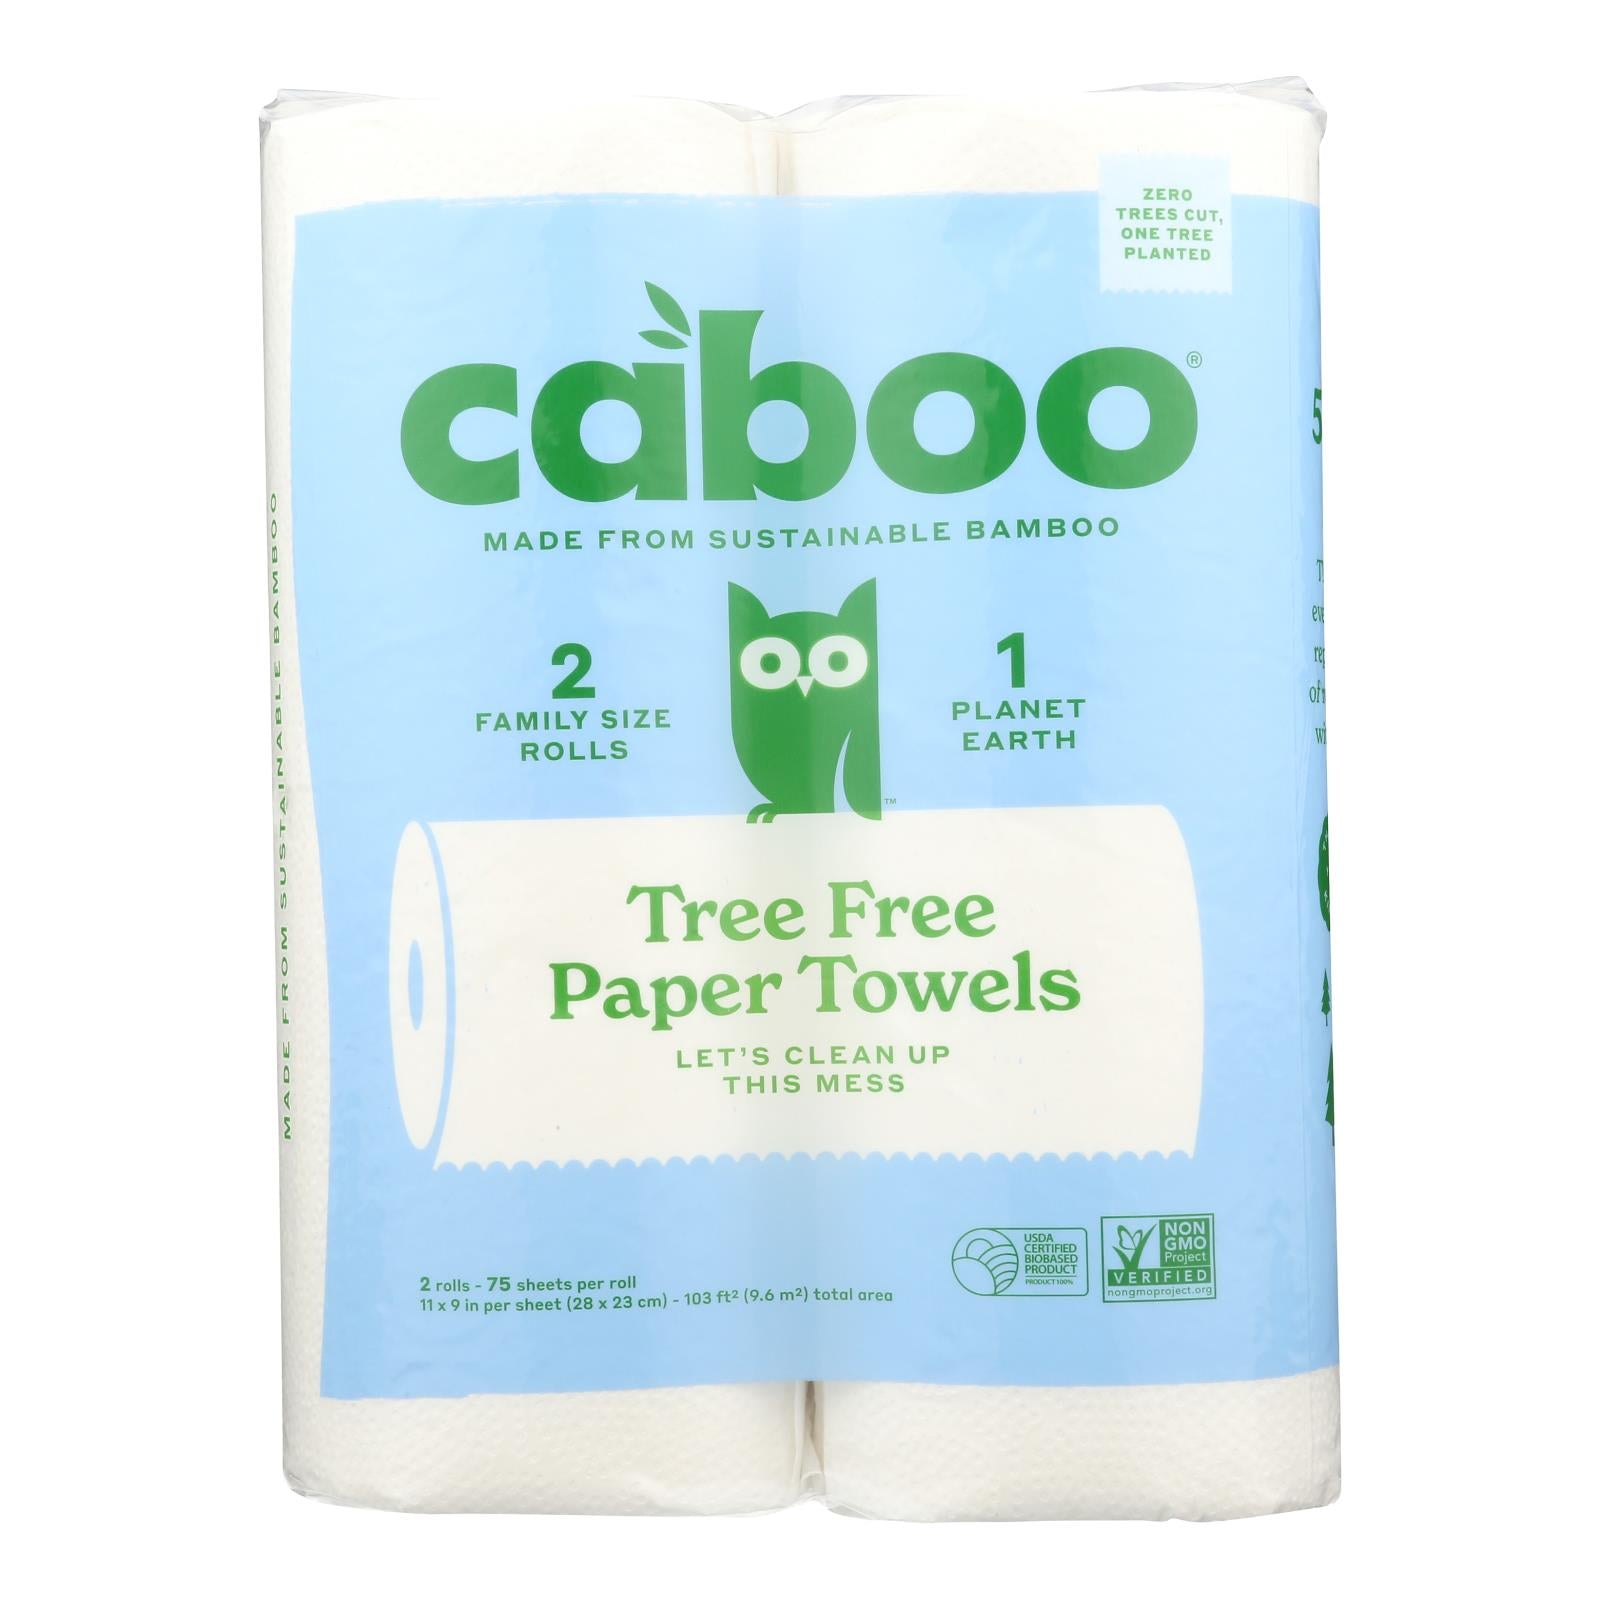 Caboo - Paper Towel 75 Sheet - Case Of 12 - 2 Ct